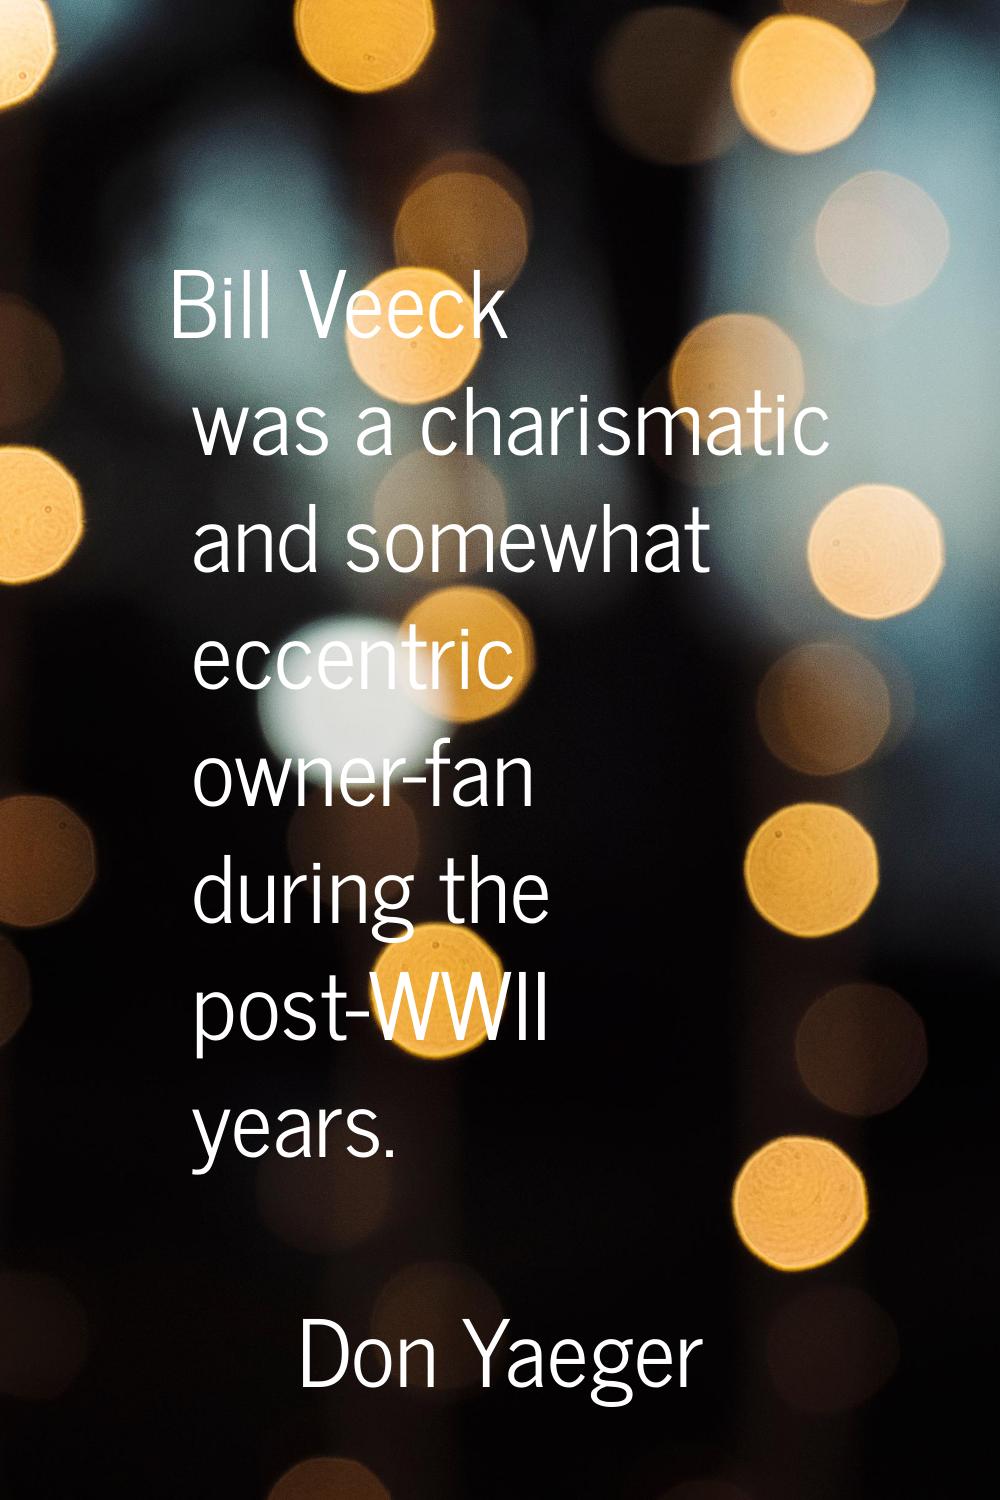 Bill Veeck was a charismatic and somewhat eccentric owner-fan during the post-WWII years.